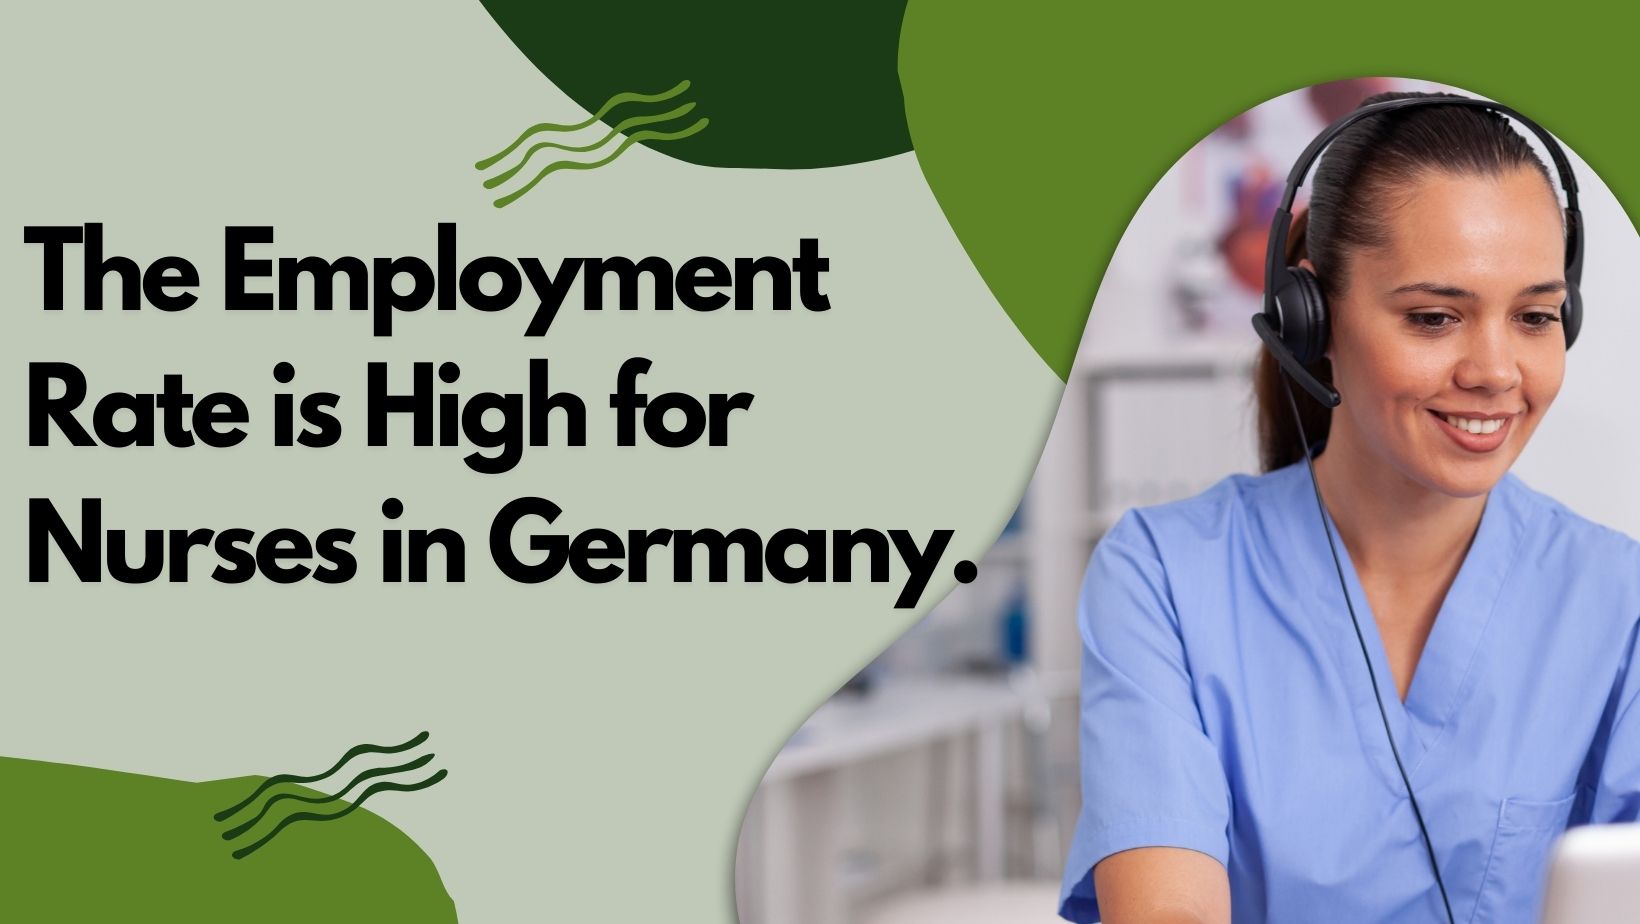 The employment rate is high for nurses in Germany.